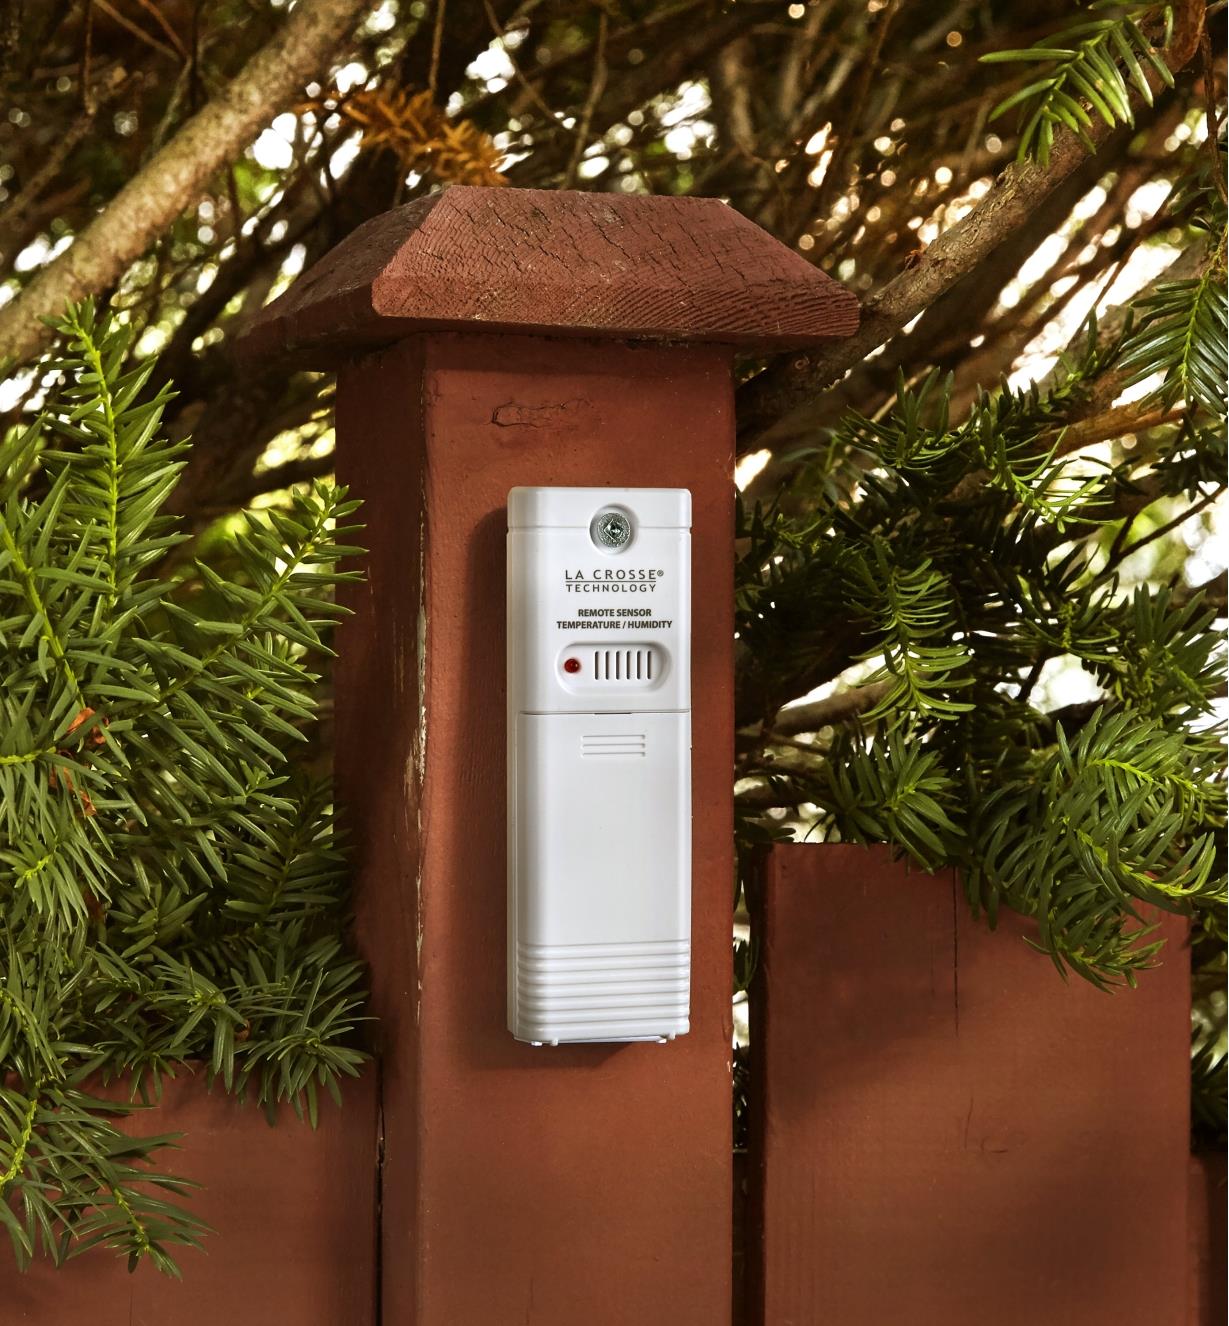 The outdoor sensor of the indoor/outdoor weather station mounted on a fence post